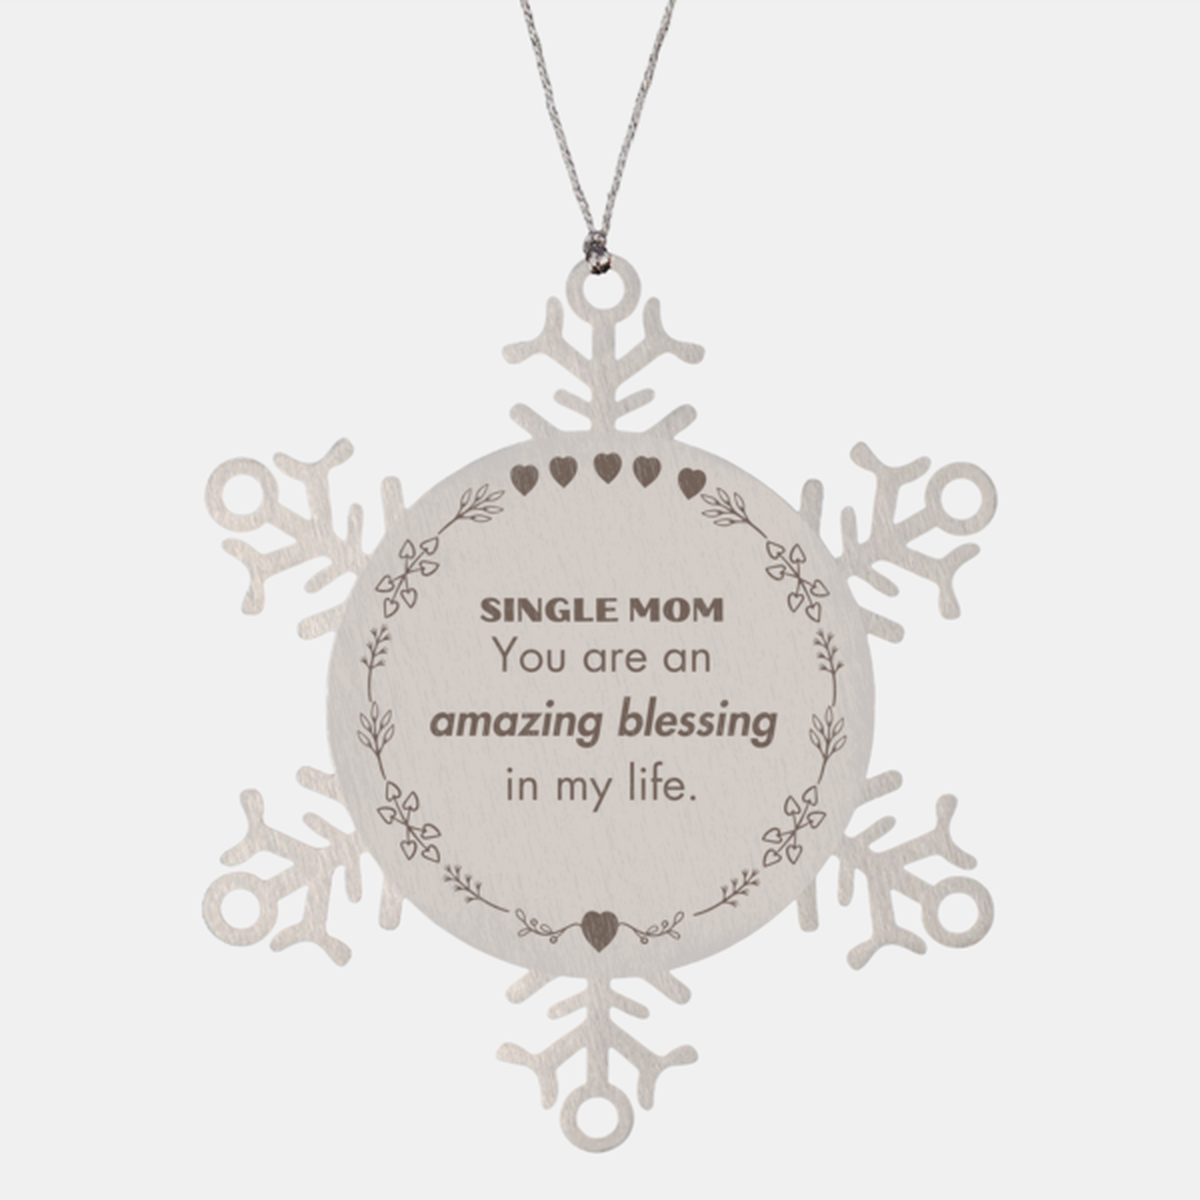 Single Mom Snowflake Ornament, You are an amazing blessing in my life, Thank You Gifts For Single Mom, Inspirational Birthday Christmas Unique Gifts For Single Mom